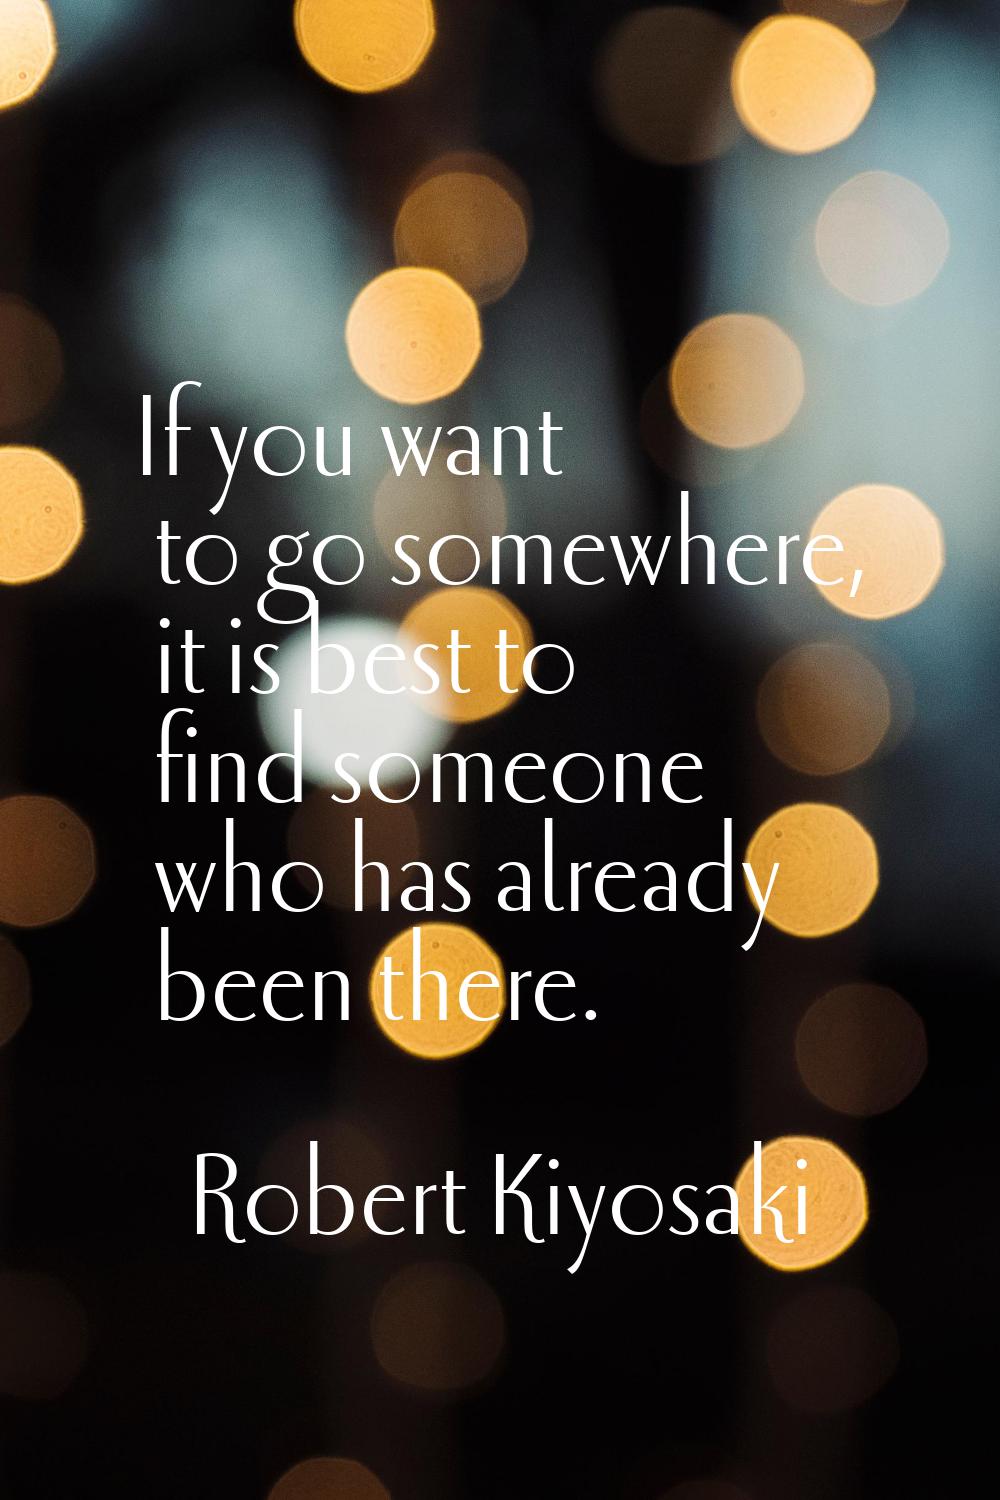 If you want to go somewhere, it is best to find someone who has already been there.